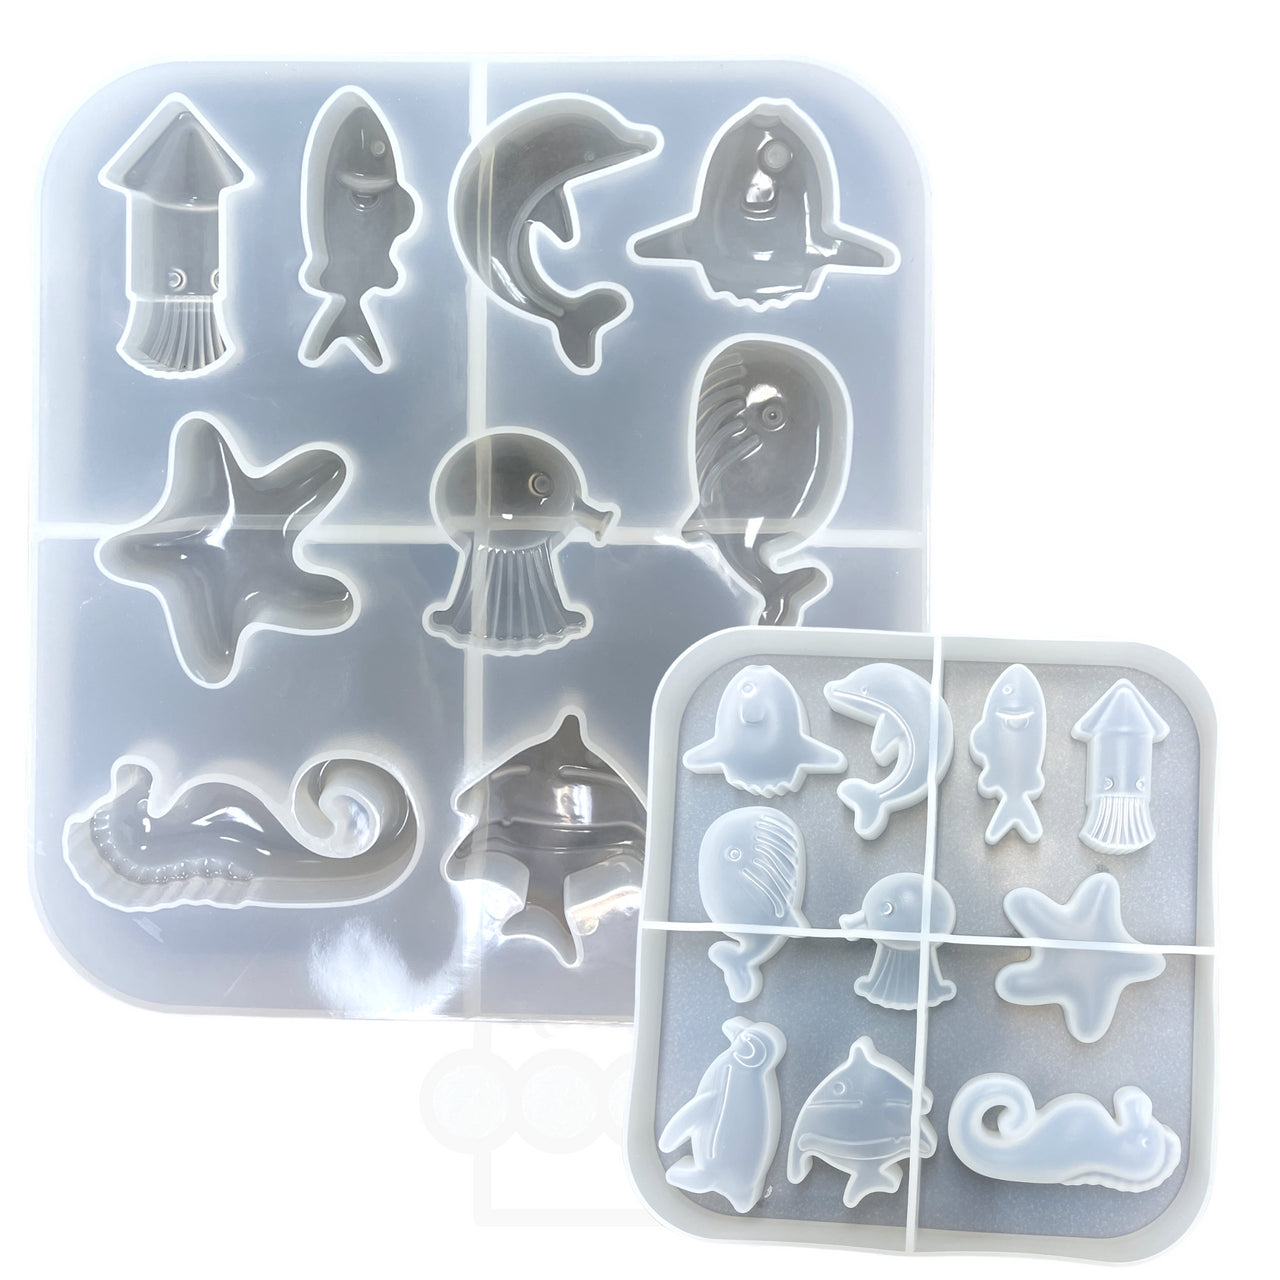 UV Safe Sea Creatures Charm Set Silicone Mold for UV or Epoxy Resin Art